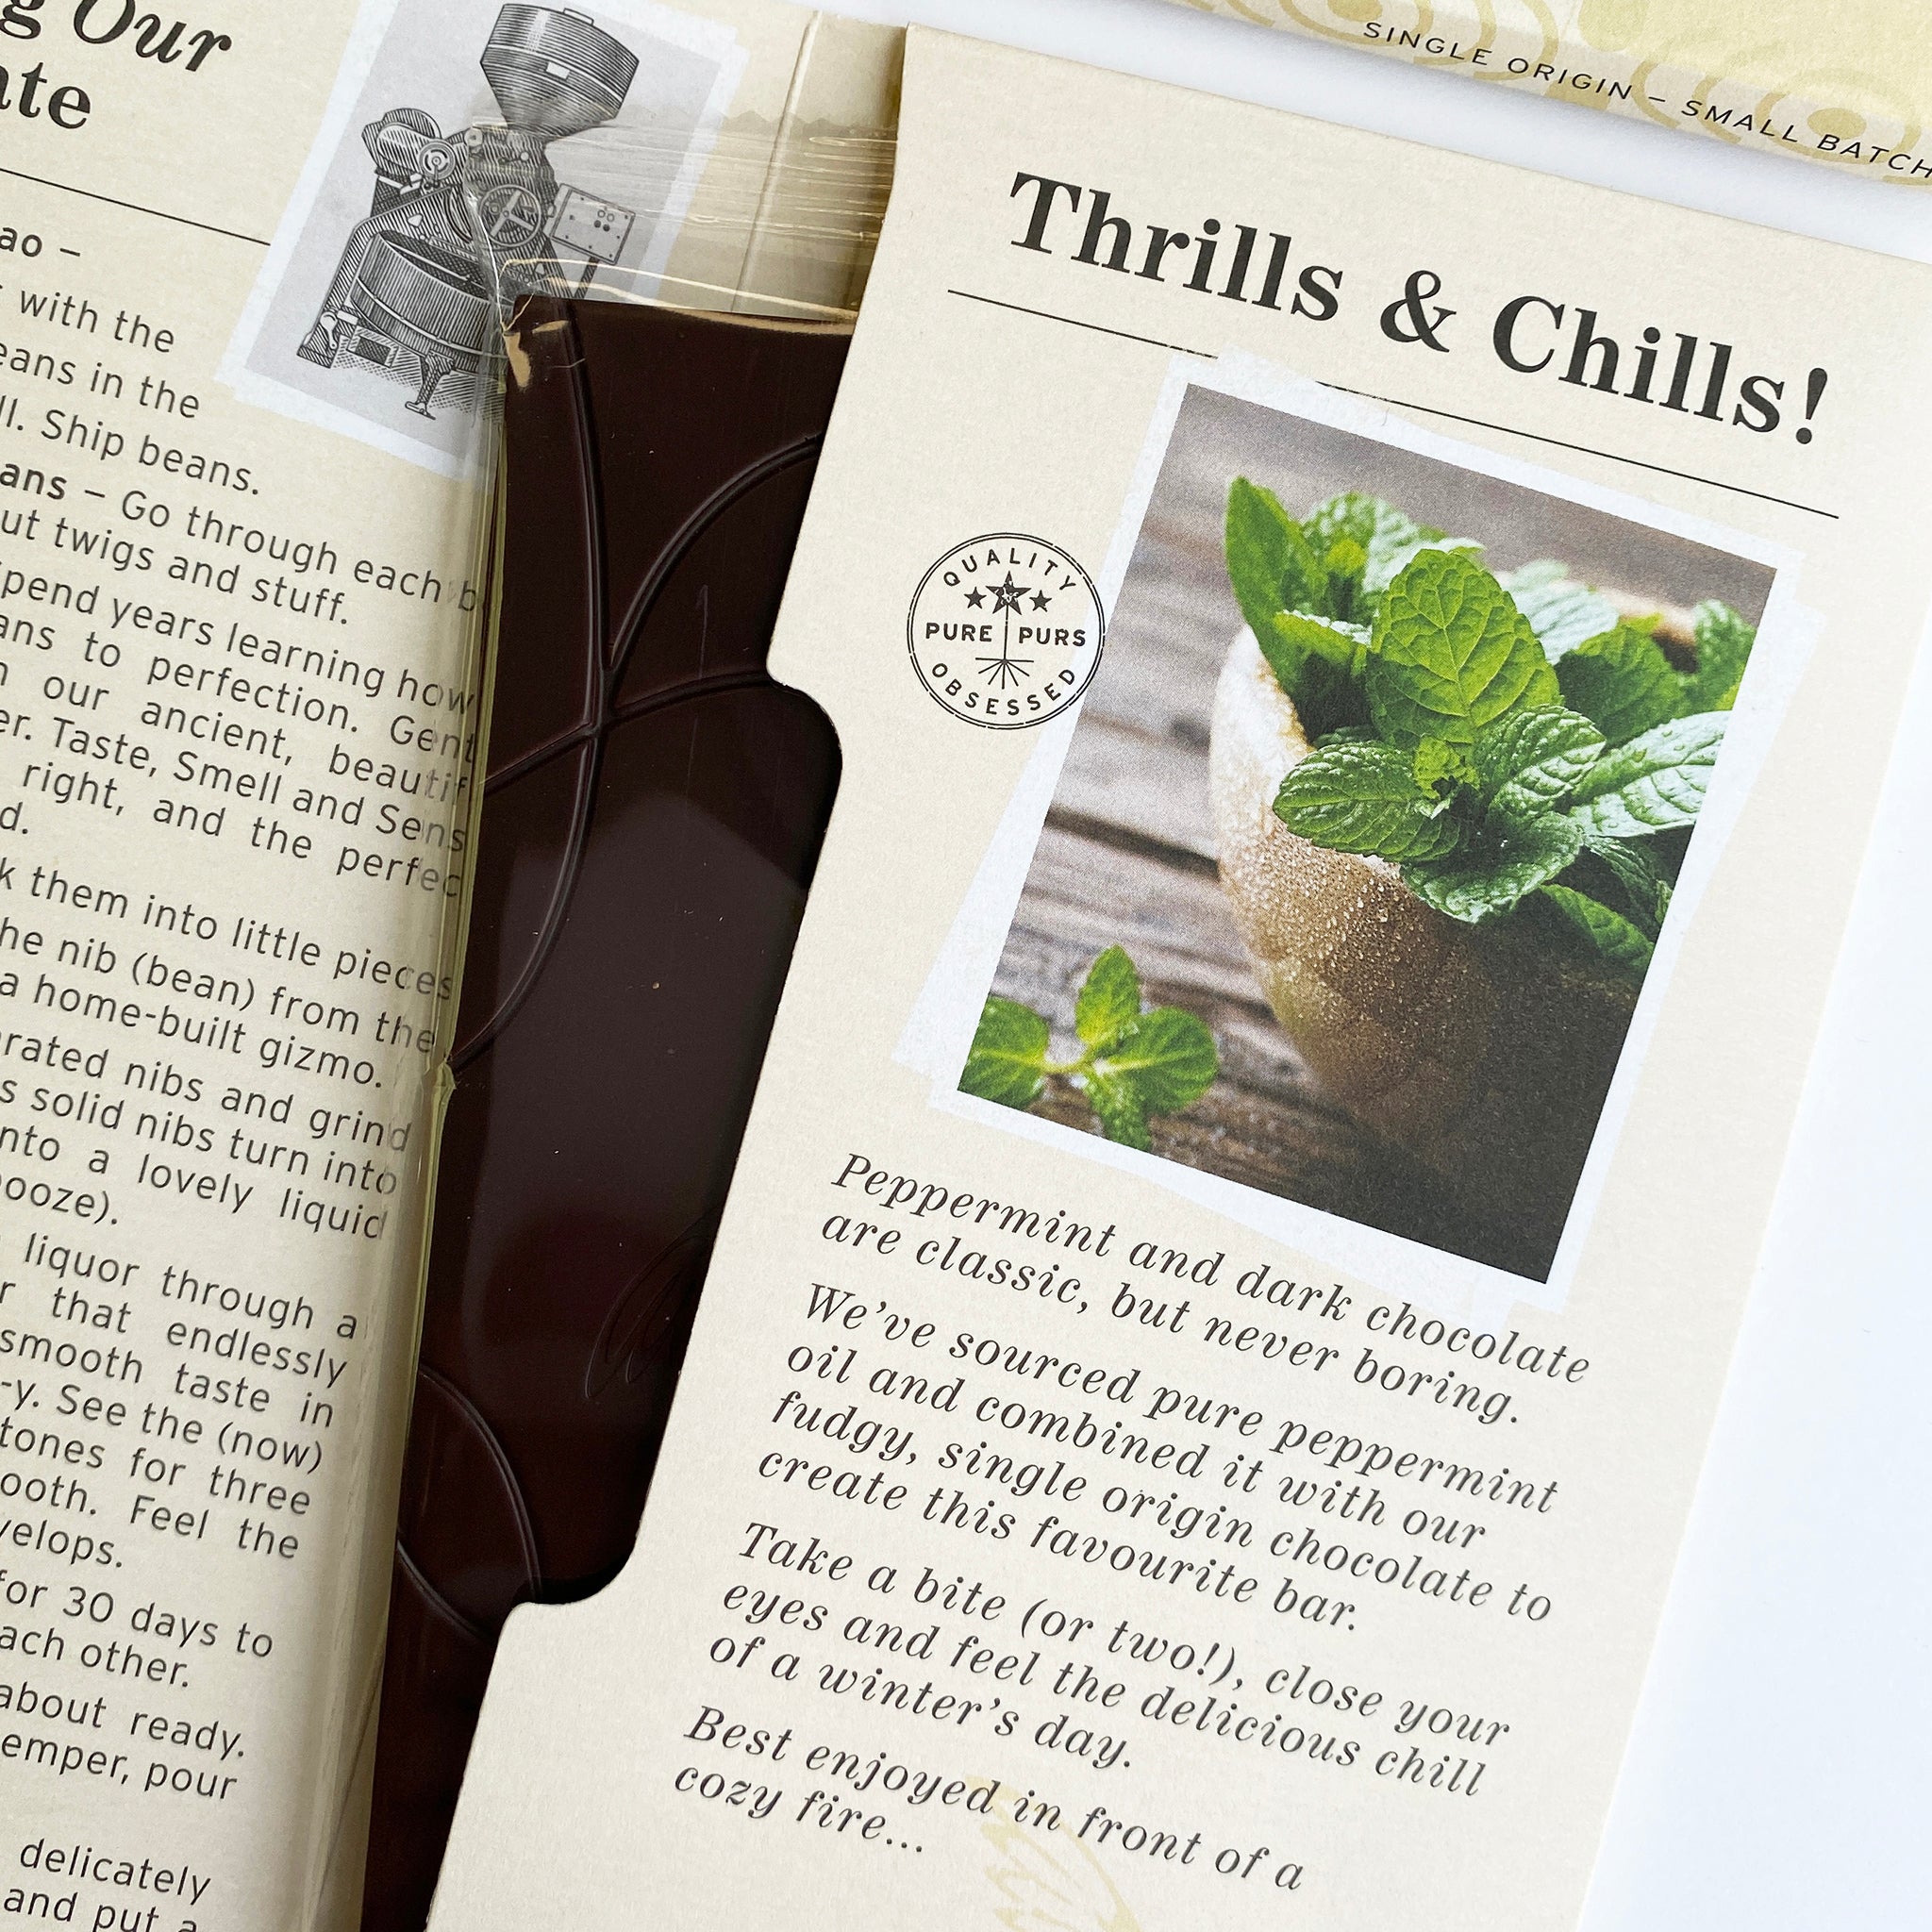 Opened peppermint chocolate bar, revealing story behind our delicious mint chocolate bar